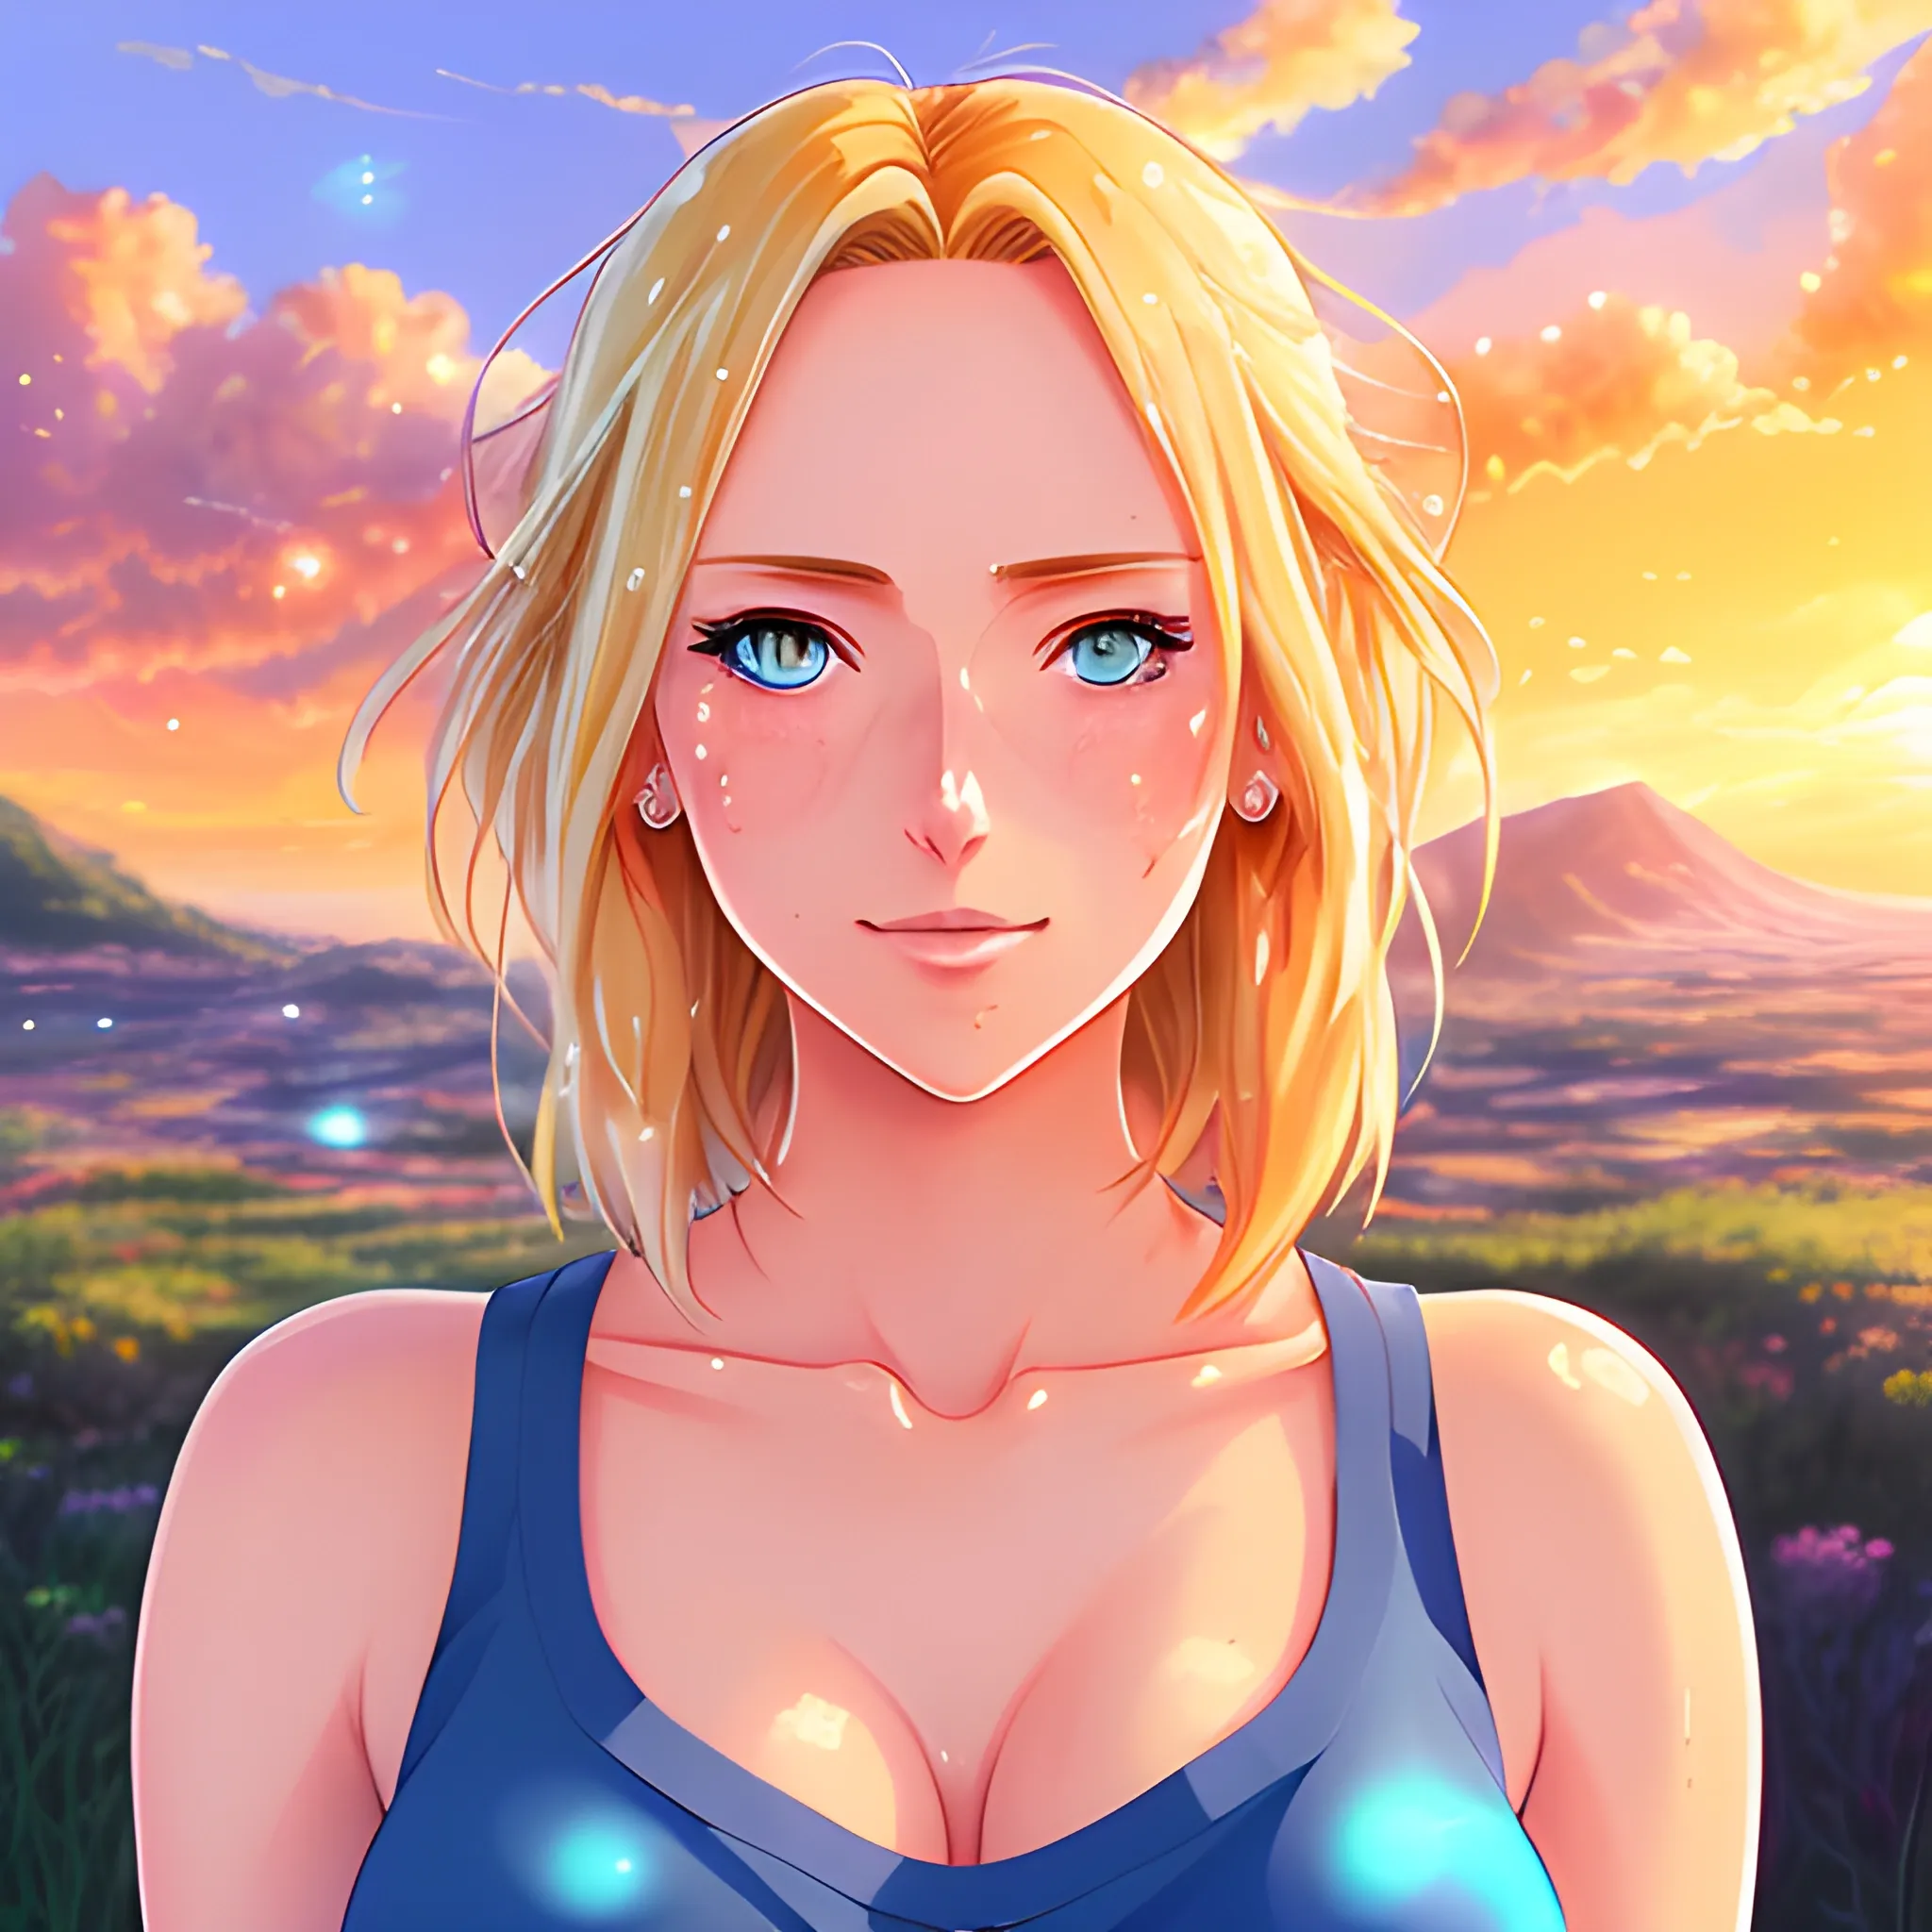 Anime art, cute young girl, shoulder-length blond hair in motion, rosy cheeks, tender face, big watery blue eyes, looks sad face, wearing a tank top not revealing, magical and luminous aura around herself, light cinematographic, volumetric light, highly detailed, magic fantasy orange sky in background with sunset and stars, digital painting, size: 3048x3048